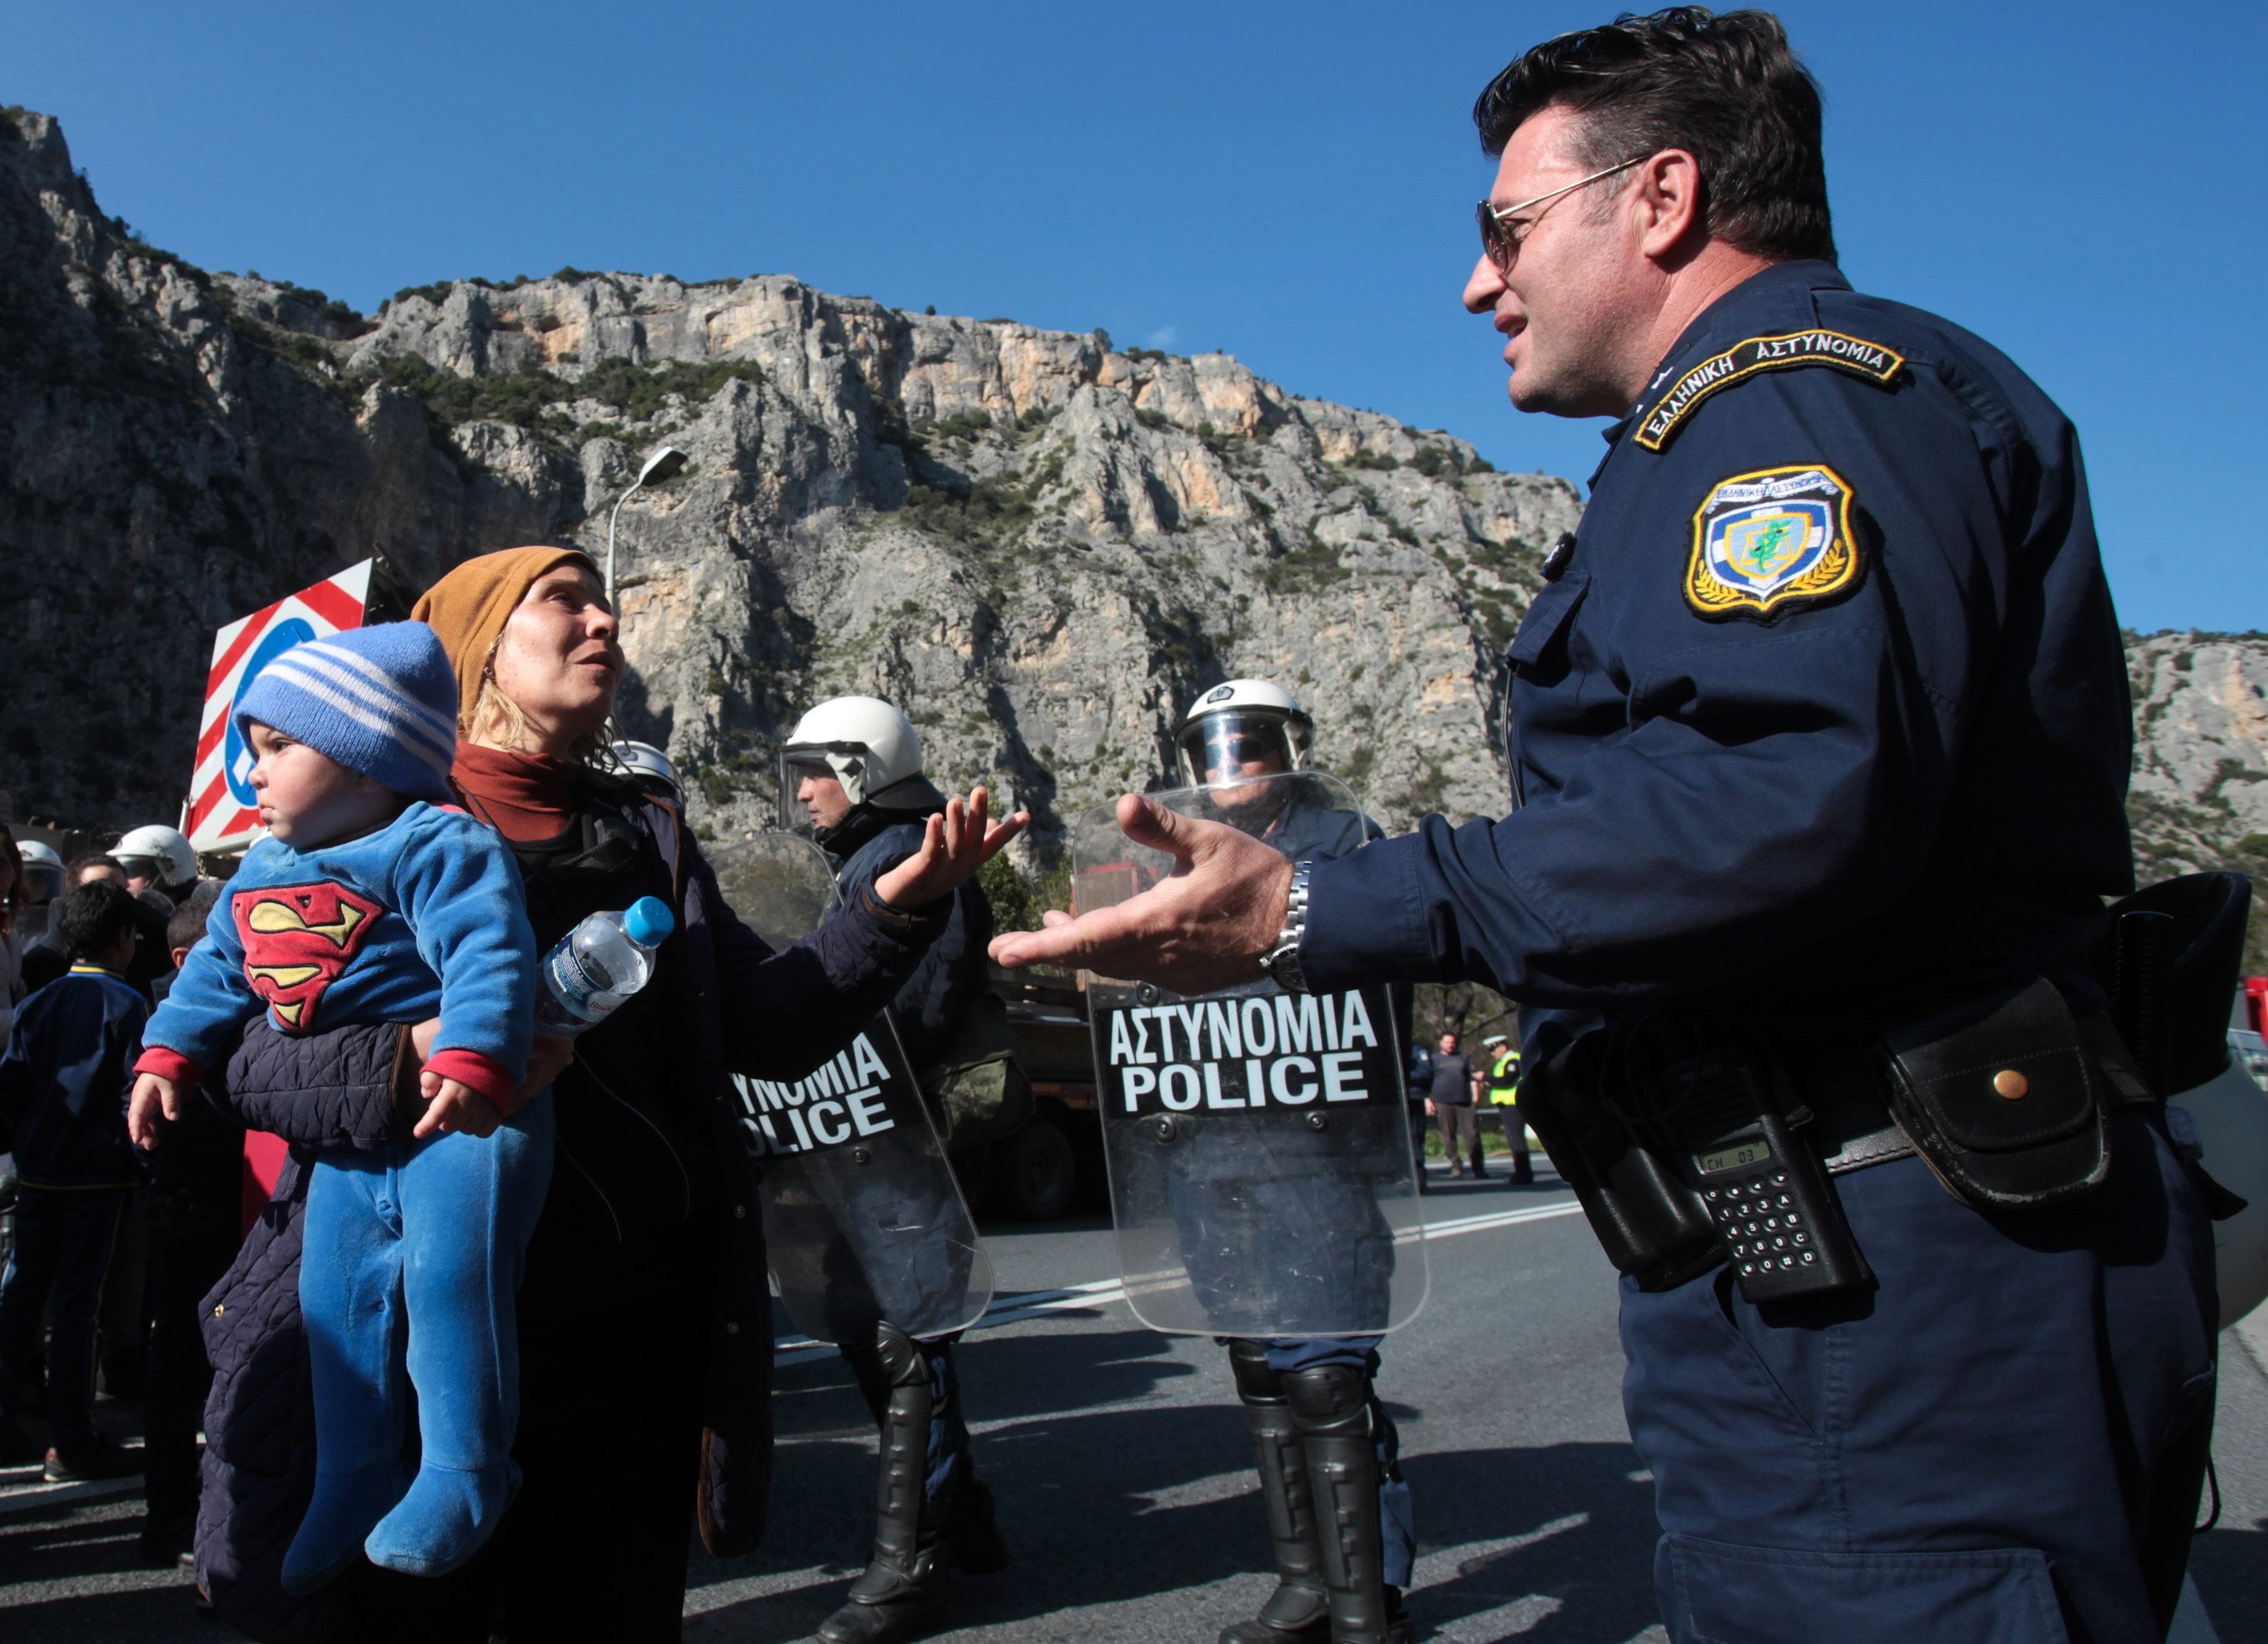 A police officer argues with migrants during a protest Thursday on a highway near Larissa, Greece. Tougher Balkan border controls have left thousands of people stranded in Greece, where some 4,000 migrants and refugees continue to arrive daily.